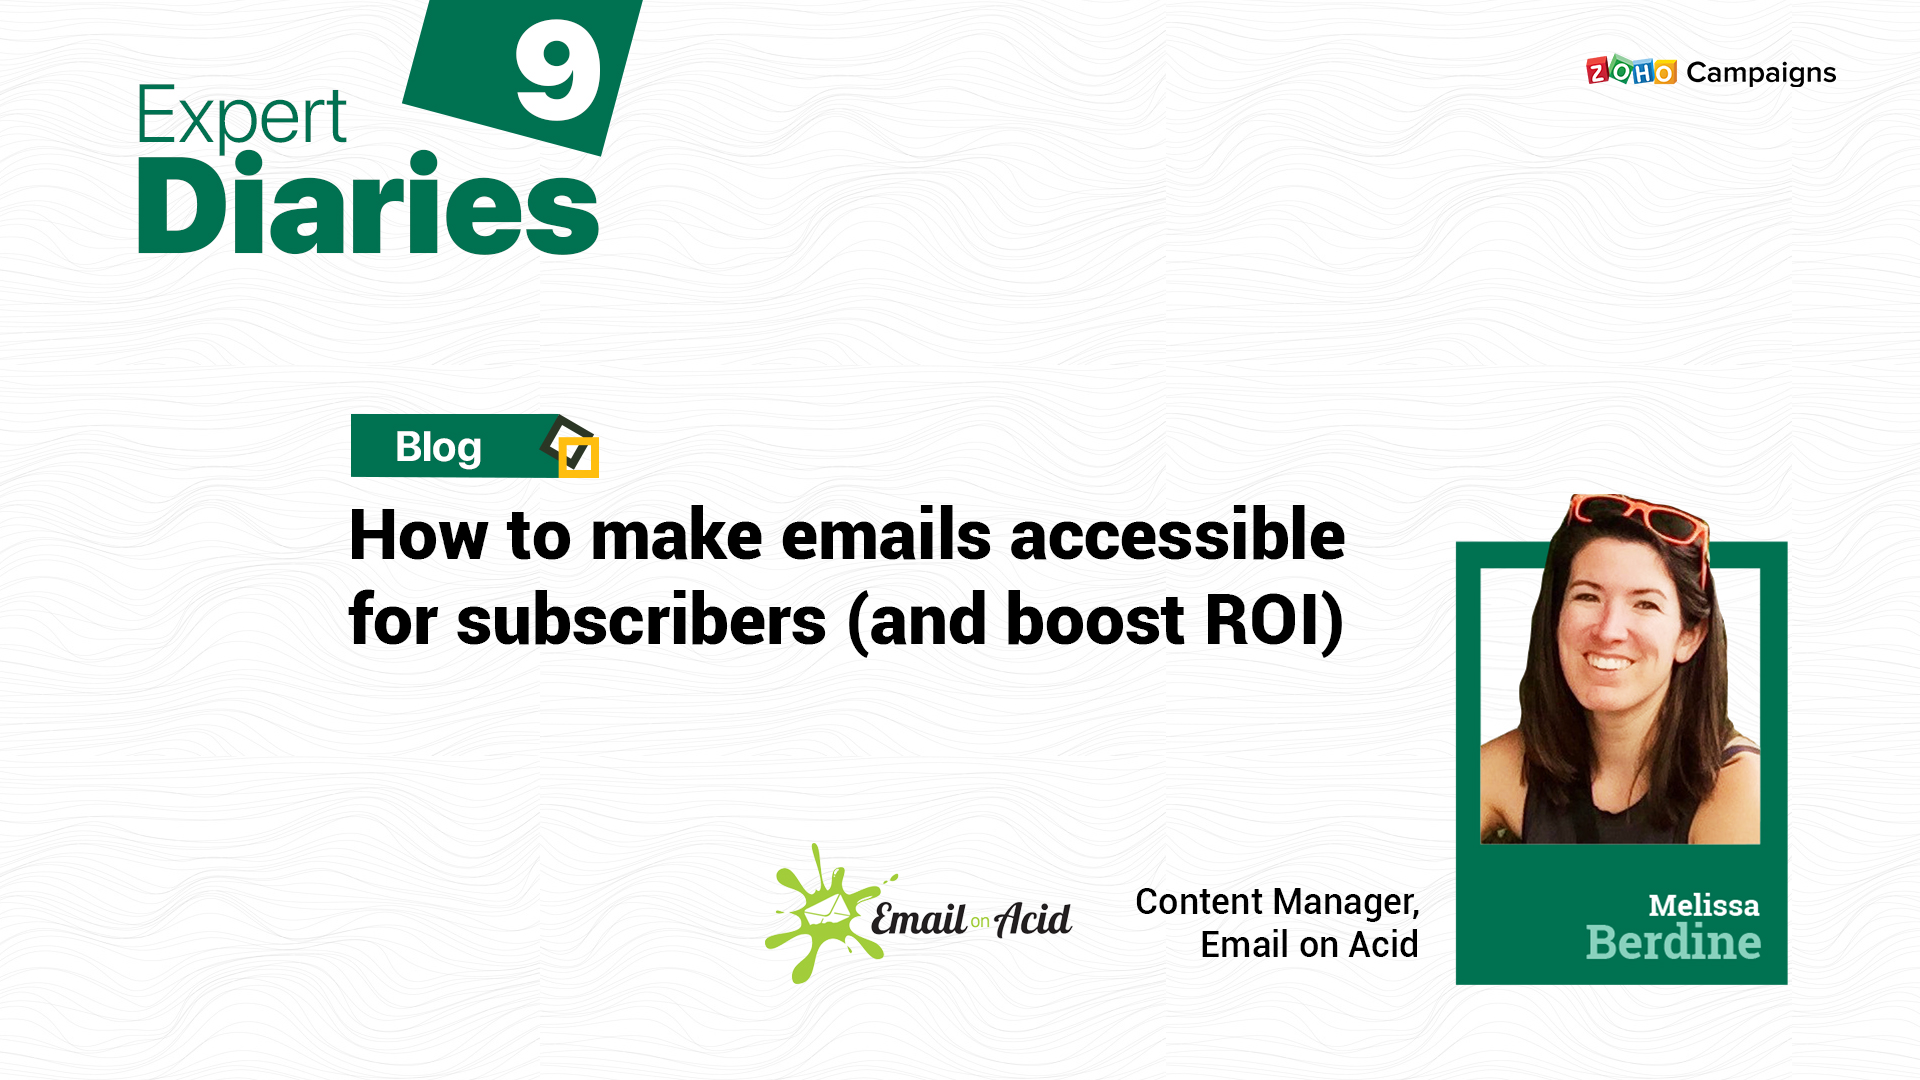 How to make emails accessible for subscribers (and boost ROI)